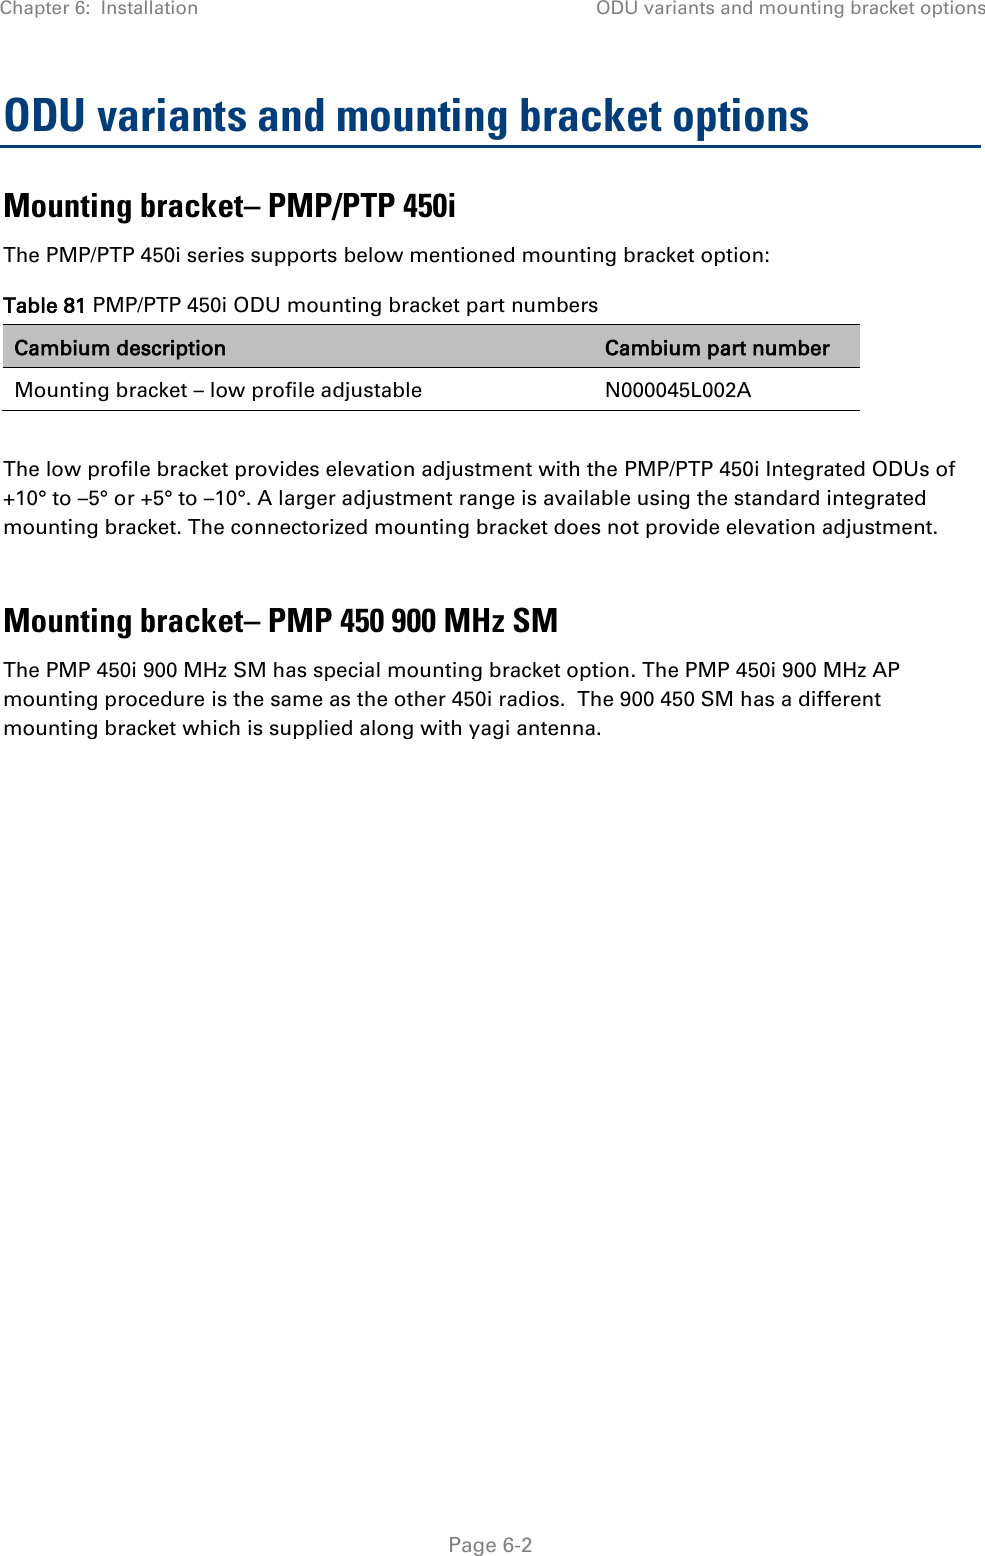 Chapter 6:  Installation ODU variants and mounting bracket options   Page 6-2 ODU variants and mounting bracket options Mounting bracket– PMP/PTP 450i The PMP/PTP 450i series supports below mentioned mounting bracket option: Table 81 PMP/PTP 450i ODU mounting bracket part numbers Cambium description Cambium part number Mounting bracket – low profile adjustable N000045L002A  The low profile bracket provides elevation adjustment with the PMP/PTP 450i Integrated ODUs of +10° to –5° or +5° to –10°. A larger adjustment range is available using the standard integrated mounting bracket. The connectorized mounting bracket does not provide elevation adjustment.  Mounting bracket– PMP 450 900 MHz SM The PMP 450i 900 MHz SM has special mounting bracket option. The PMP 450i 900 MHz AP mounting procedure is the same as the other 450i radios.  The 900 450 SM has a different mounting bracket which is supplied along with yagi antenna.  